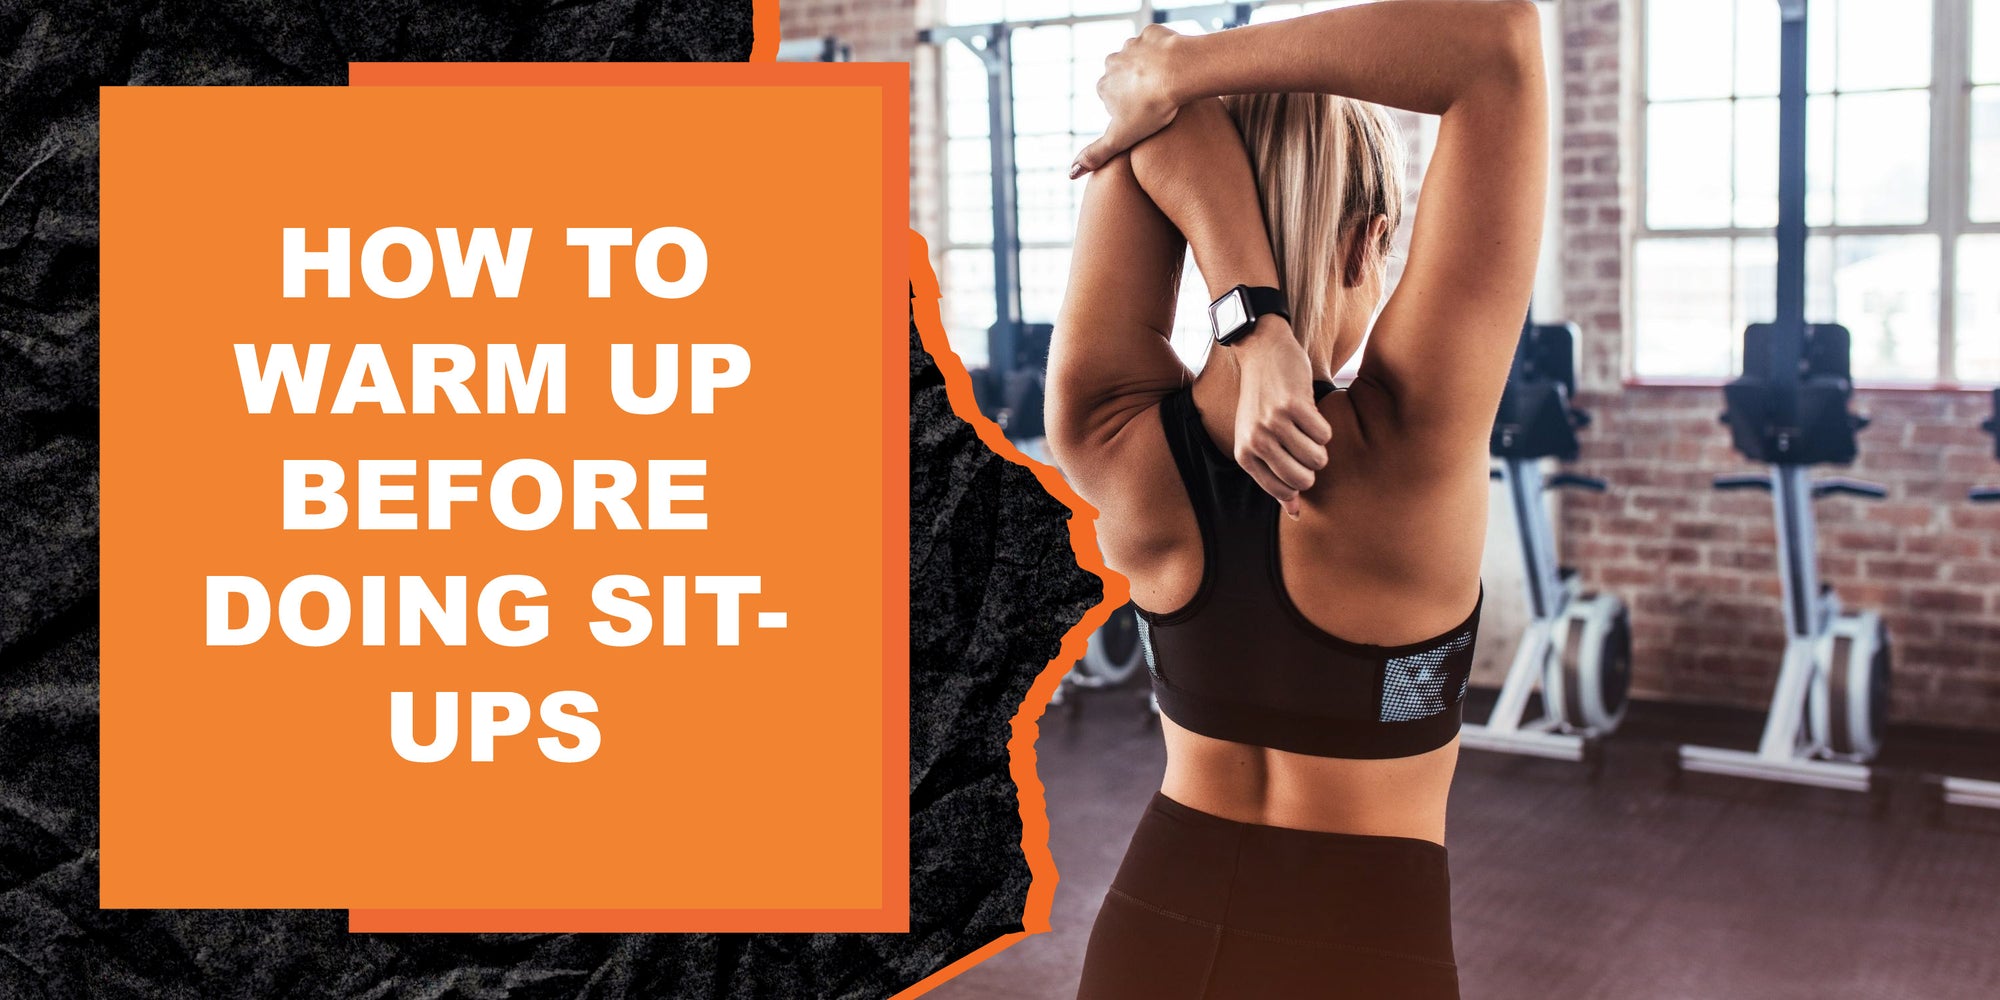 How to Warm Up Before Doing Sit-Ups